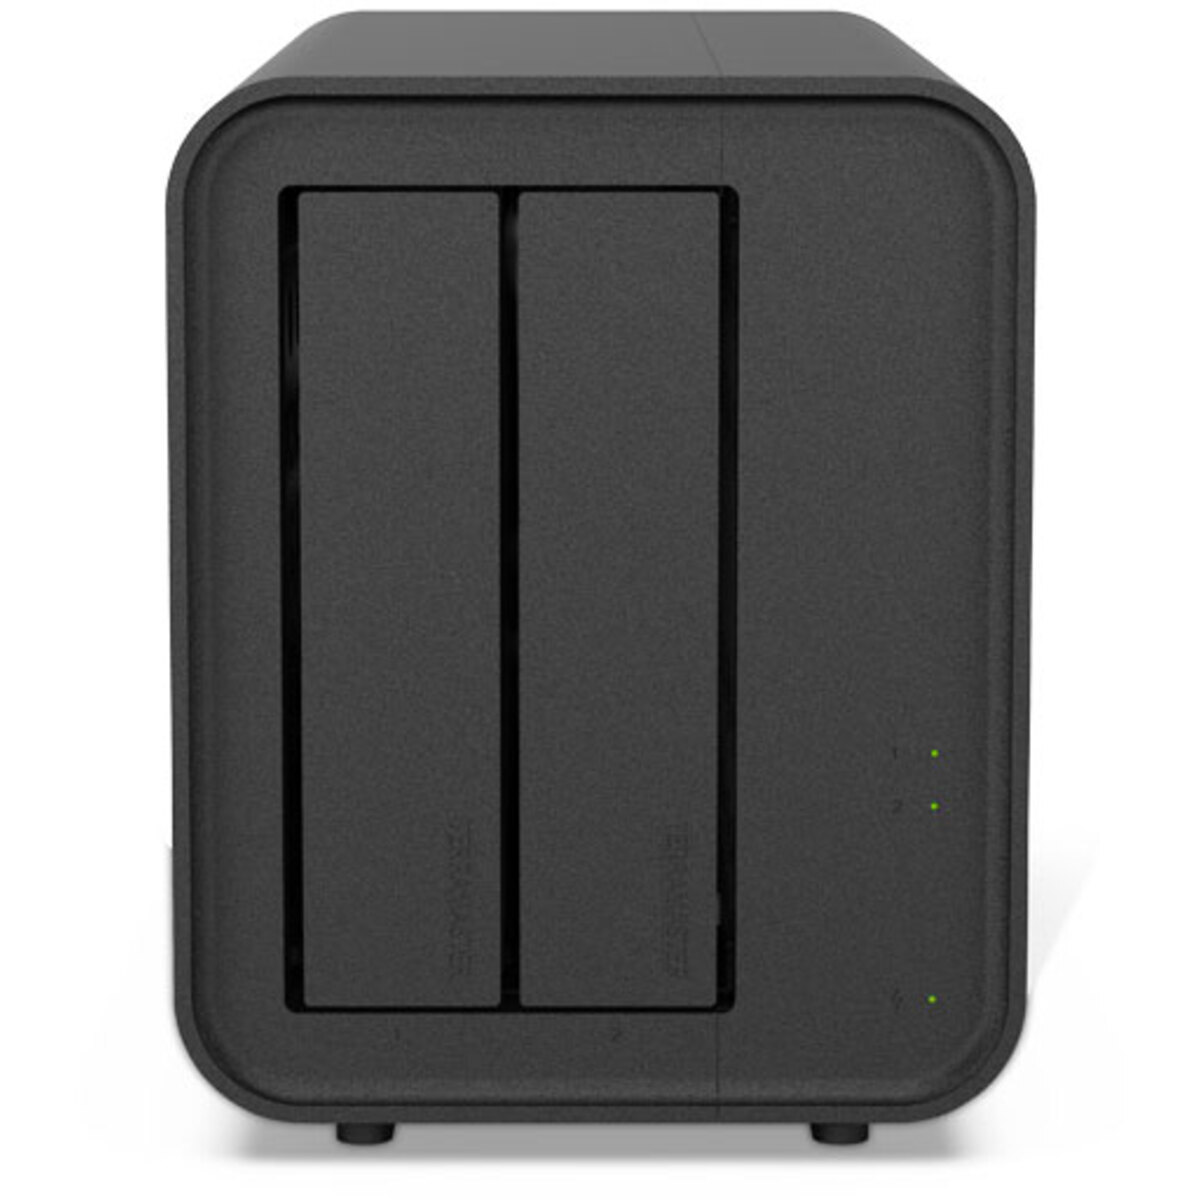 TerraMaster F2-424 4tb 2-Bay Desktop Multimedia / Power User / Business NAS - Network Attached Storage Device 2x2tb Sandisk Ultra 3D SDSSDH3-2T00 2.5 560/520MB/s SATA 6Gb/s SSD CONSUMER Class Drives Installed - Burn-In Tested F2-424